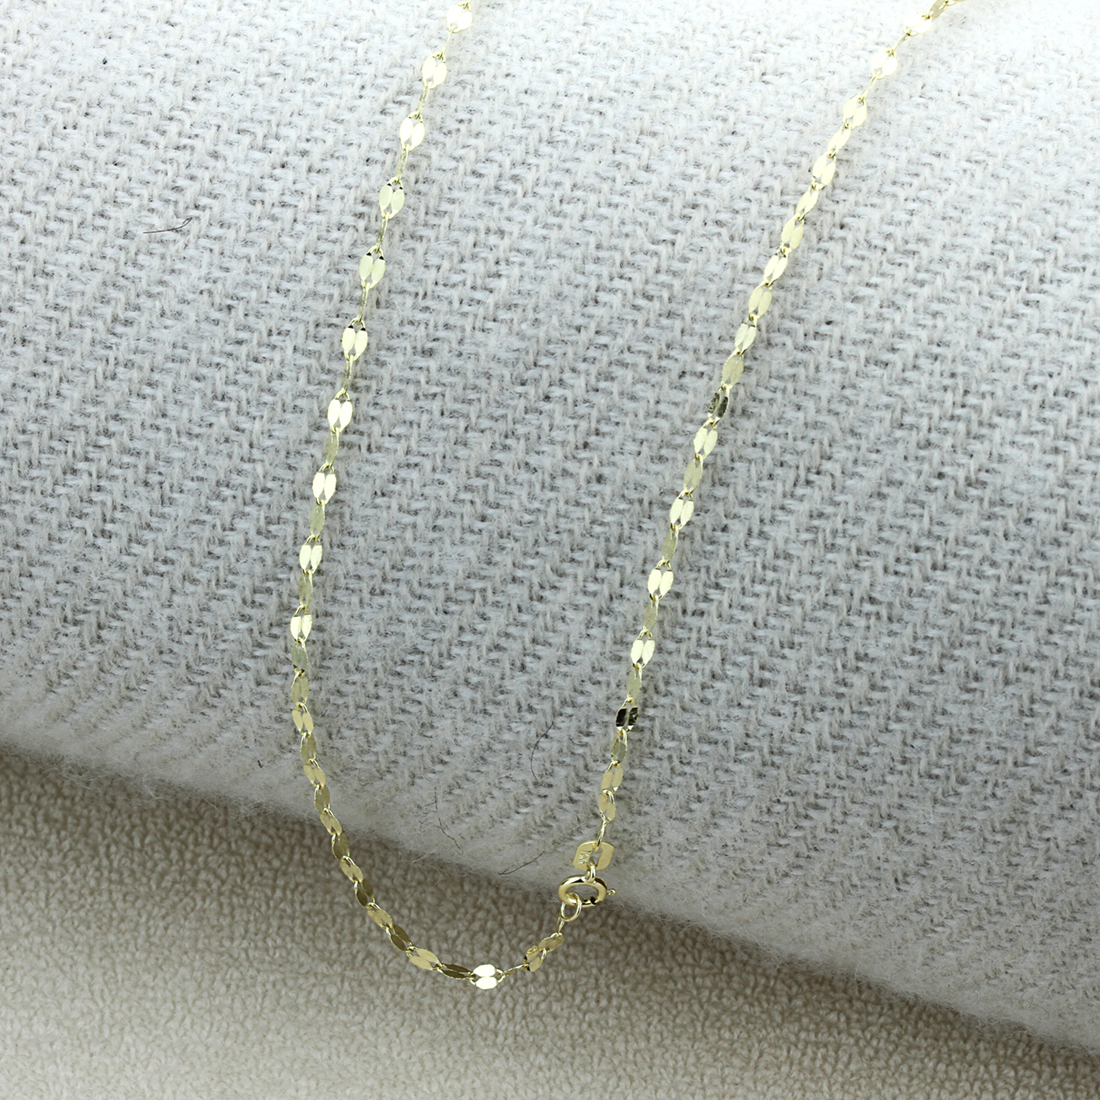 DoubleAccent 14K Gold 2mm Italian Dual Cut Mirro Chain Necklaces  ( Available Length 16", 18", 20")